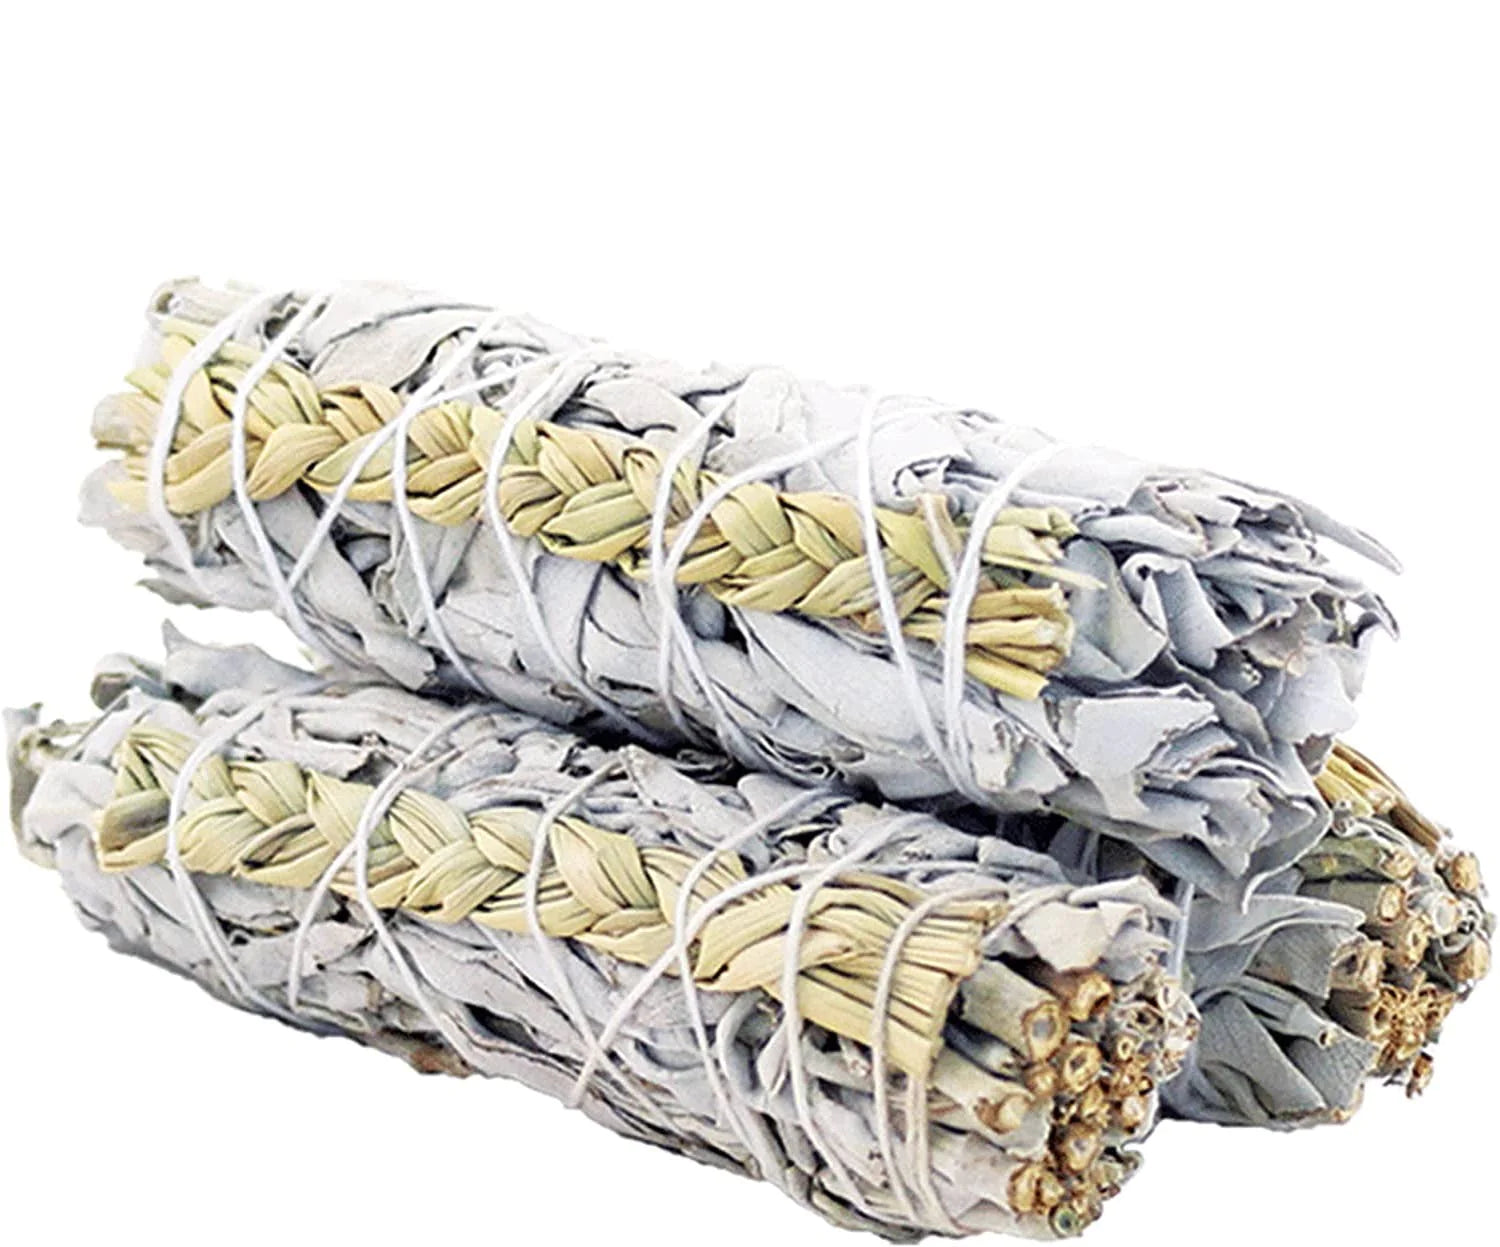 White Sage and Sweetgrass Smudge Stick - 4"